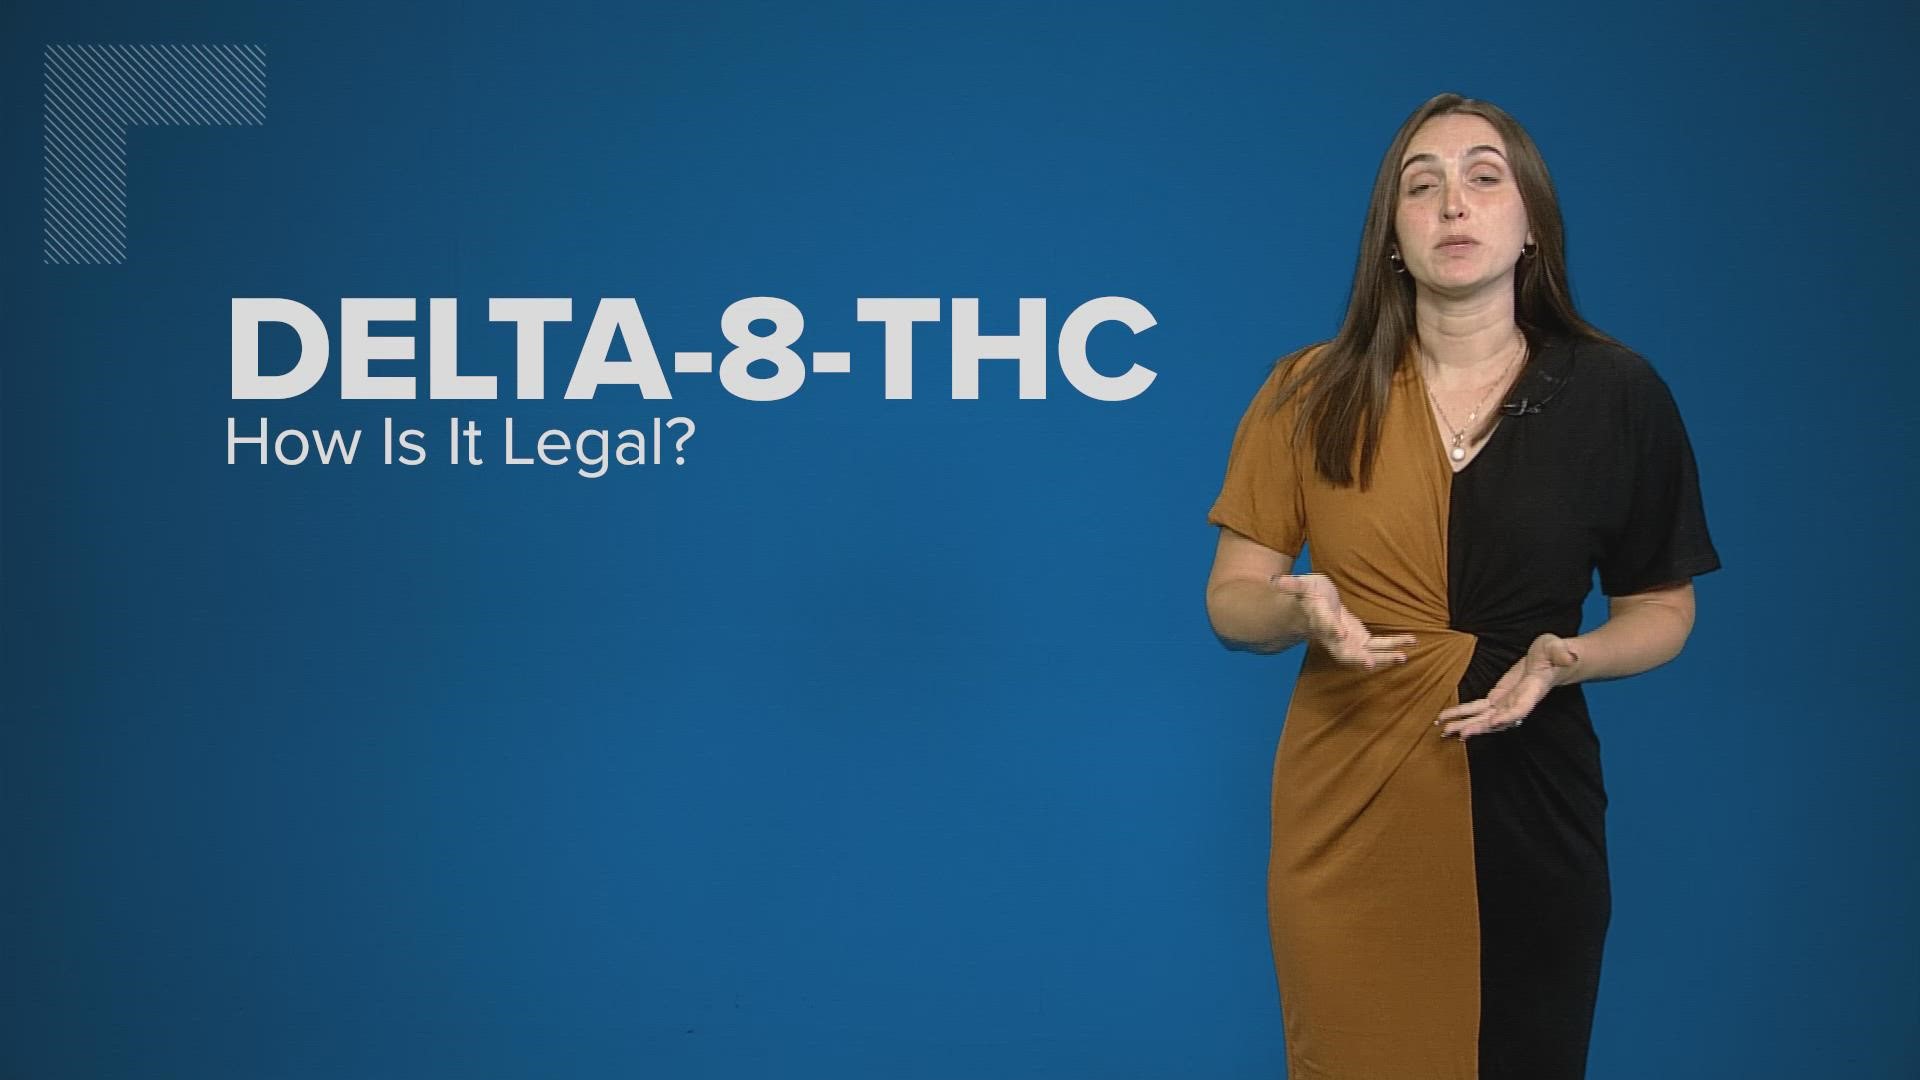 In weed wary Indiana, getting caught with small amounts of marijuana can mean jail time. Enter Delta-8-THC, the legal compound that produces a mild high being sold.